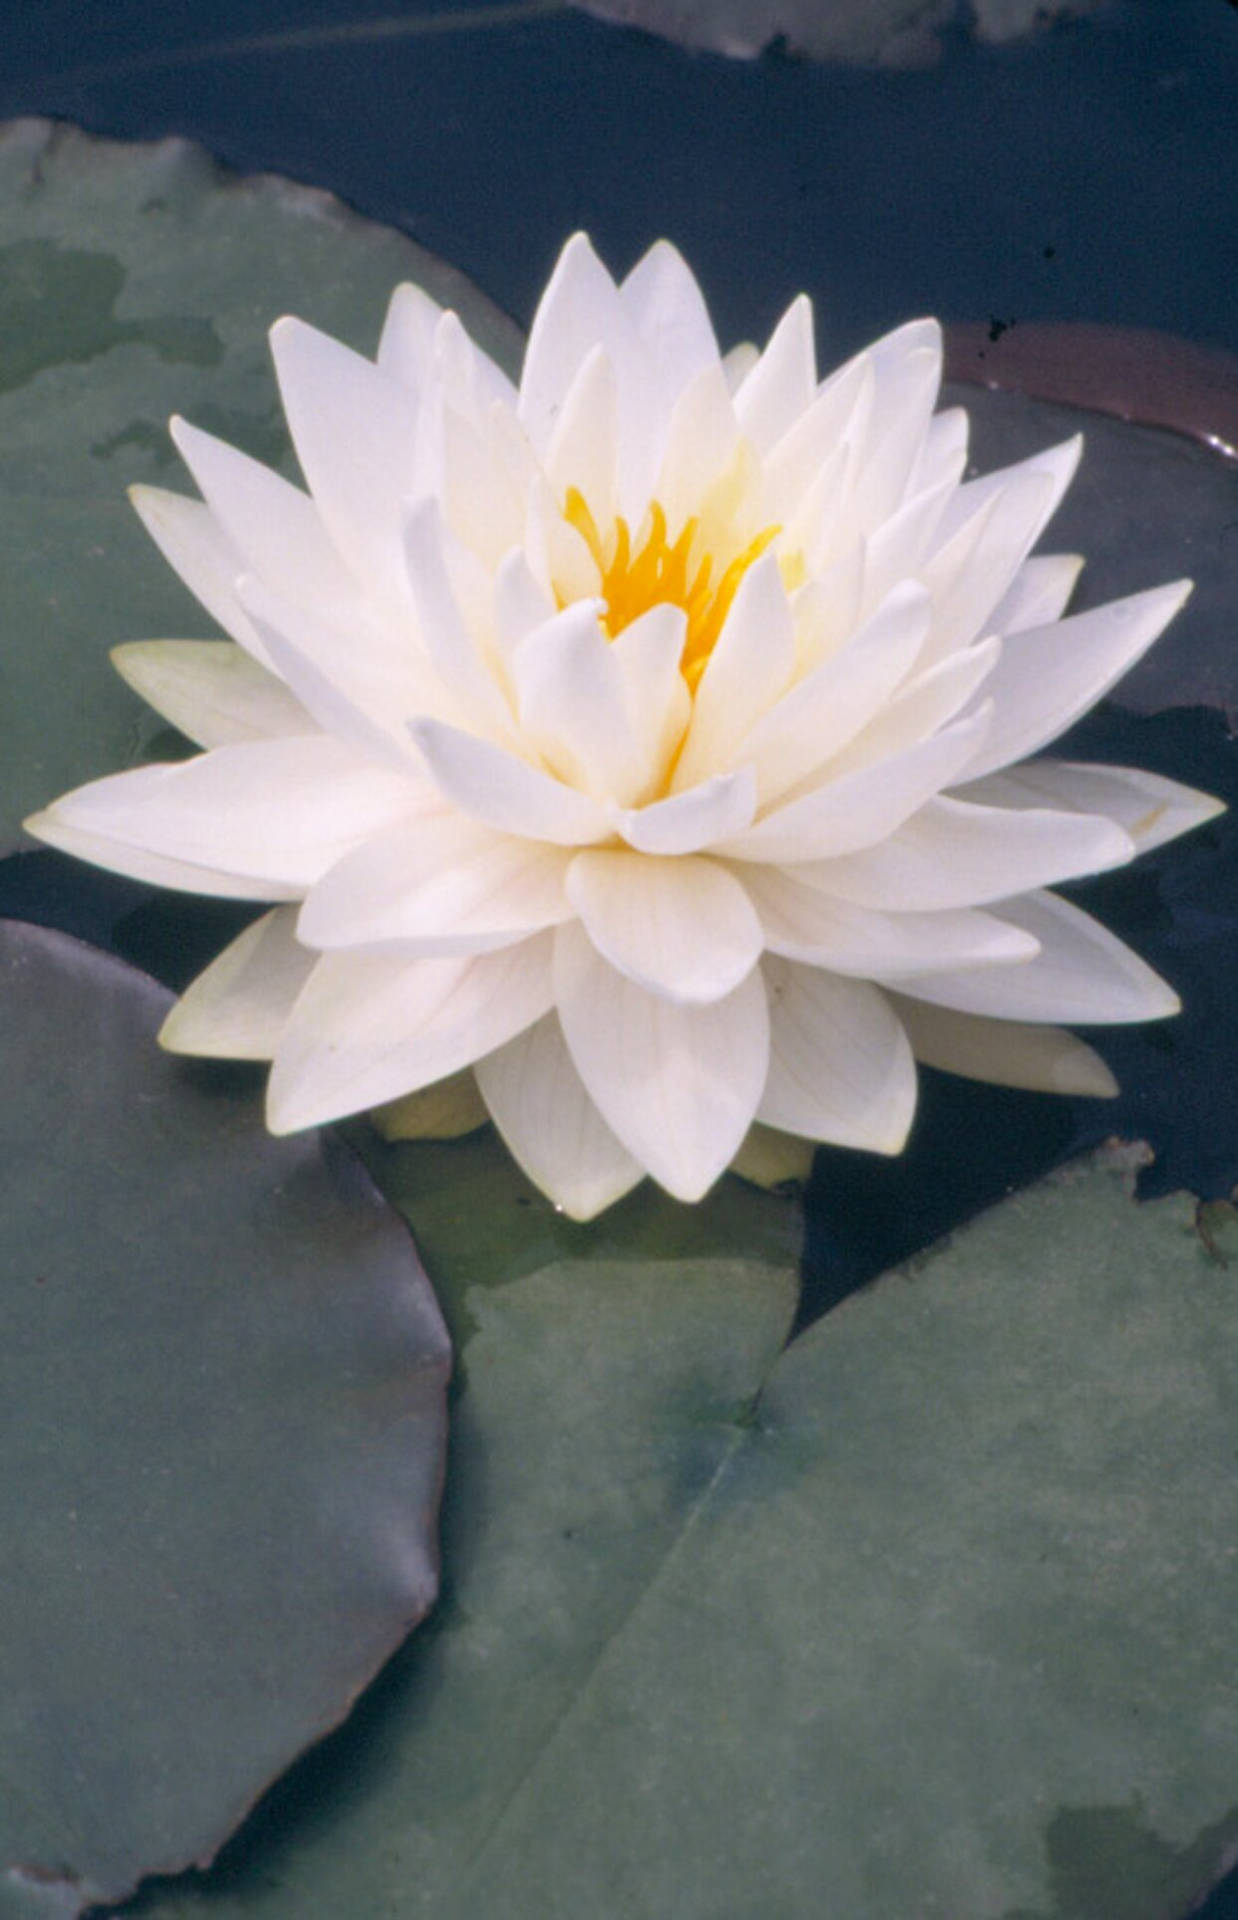 Tranquil Beauty Of A Blooming Water Lily In A Serene Pond.